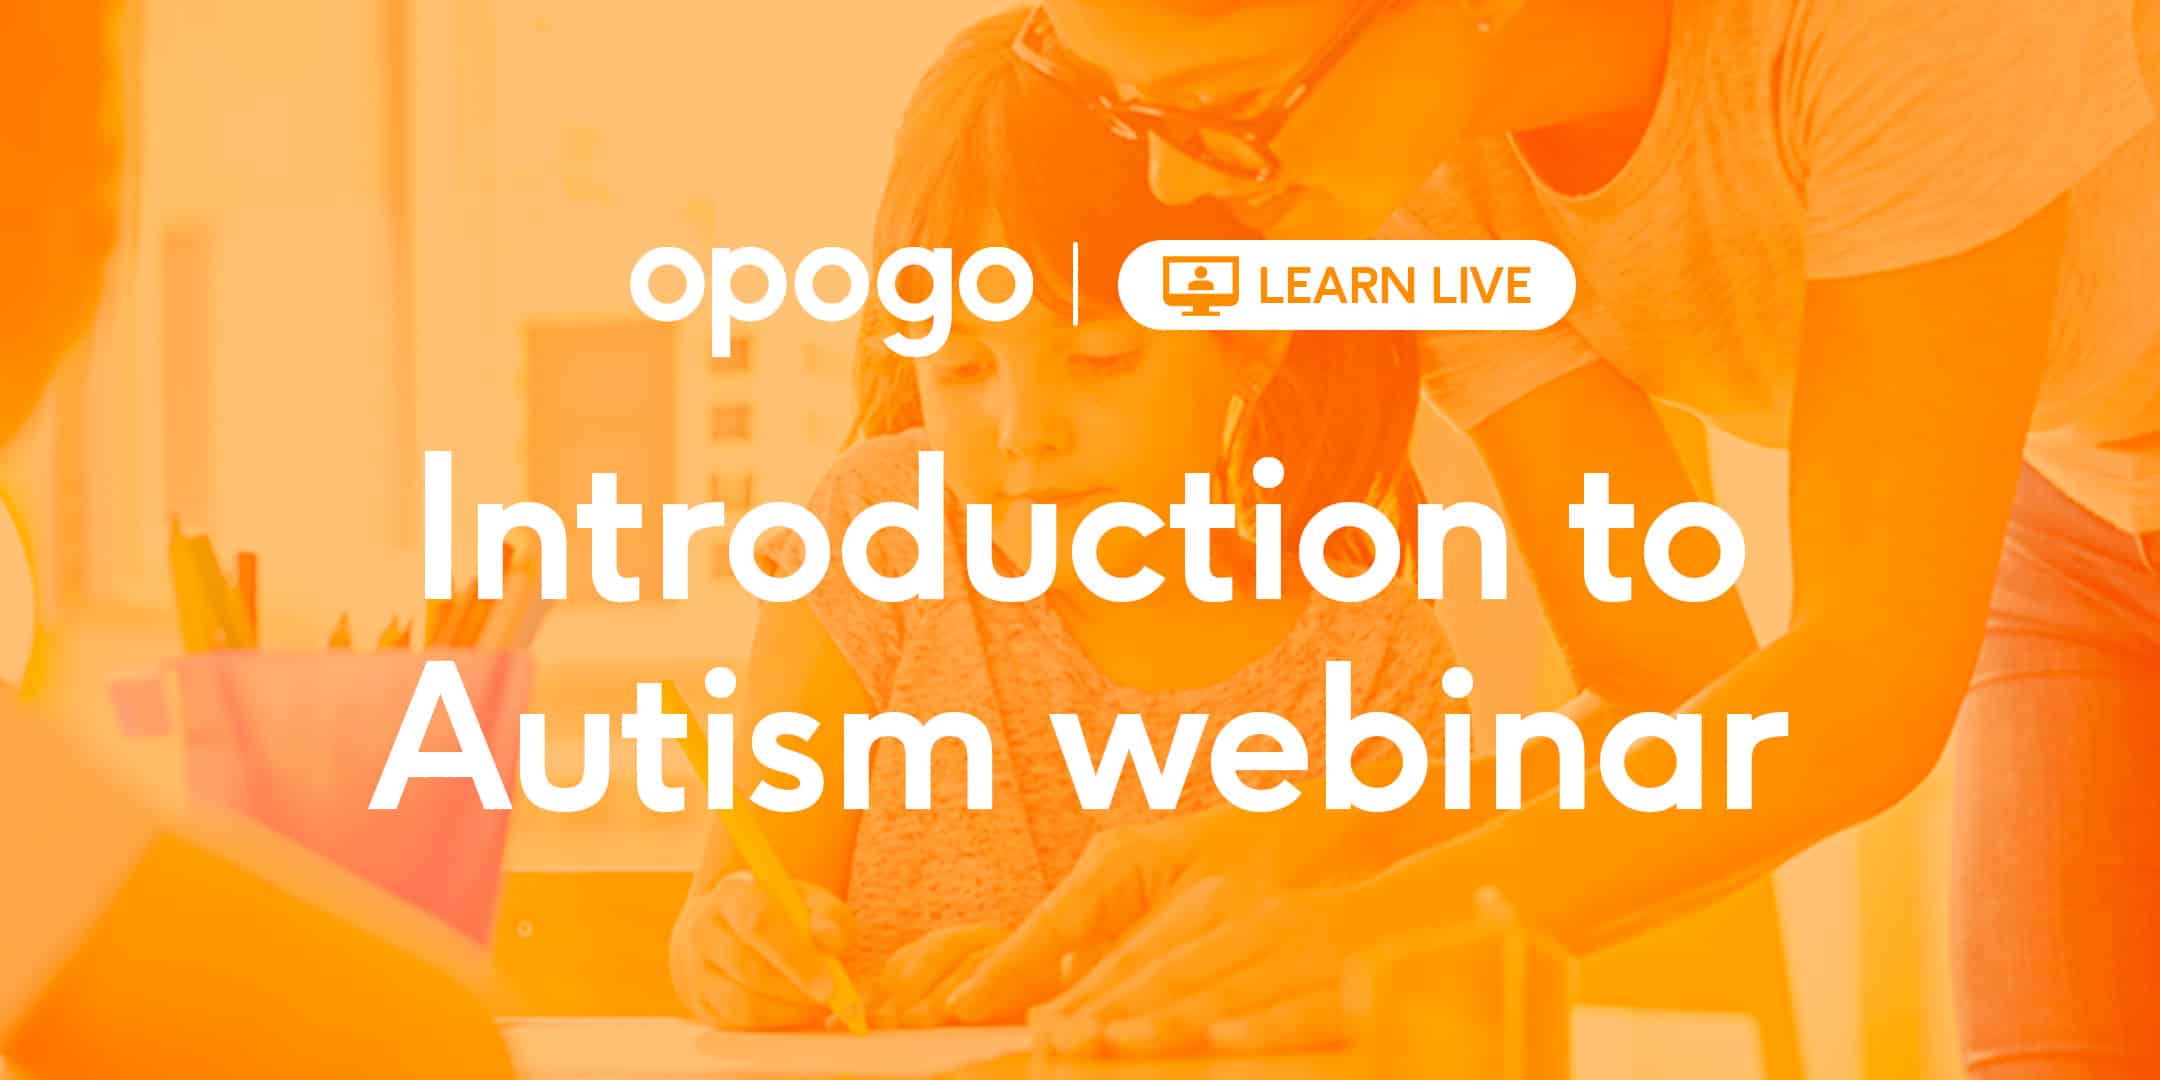 Introduction to Autism webinar